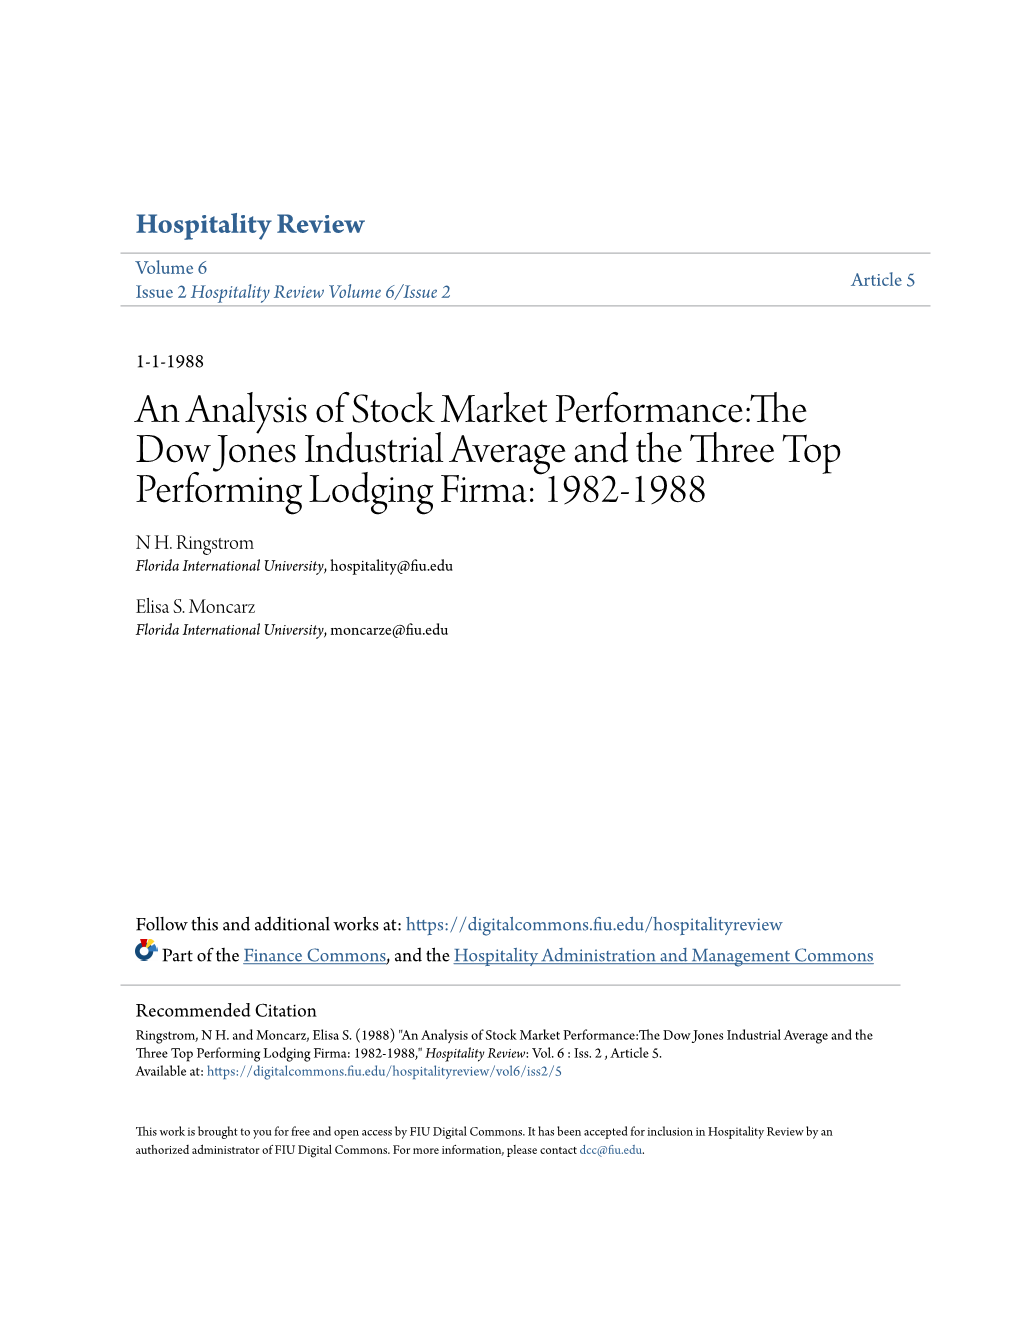 An Analysis of Stock Market Performance:The Dow Jones Industrial Average and the Three Top Performing Lodging Firma: 1982-1988 N H